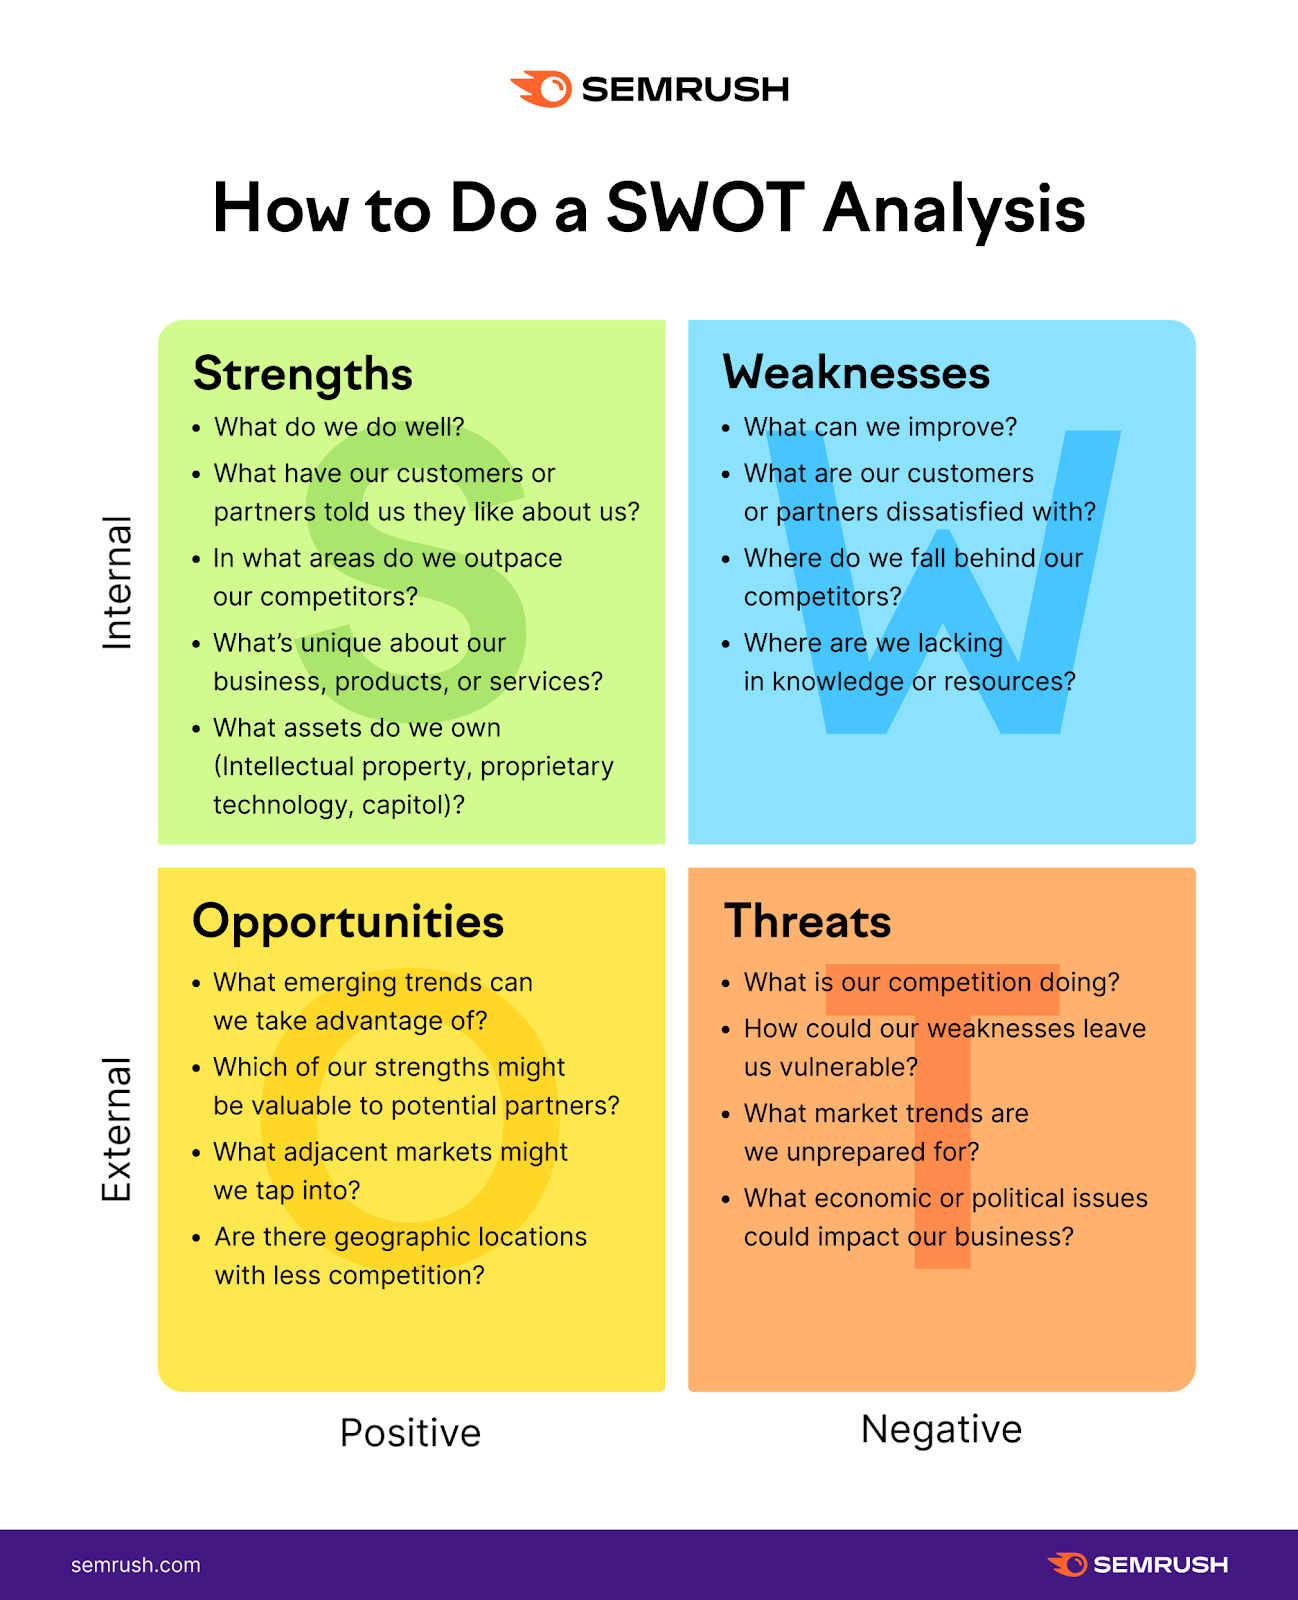 Questions you'd ask in a SWOT analysis